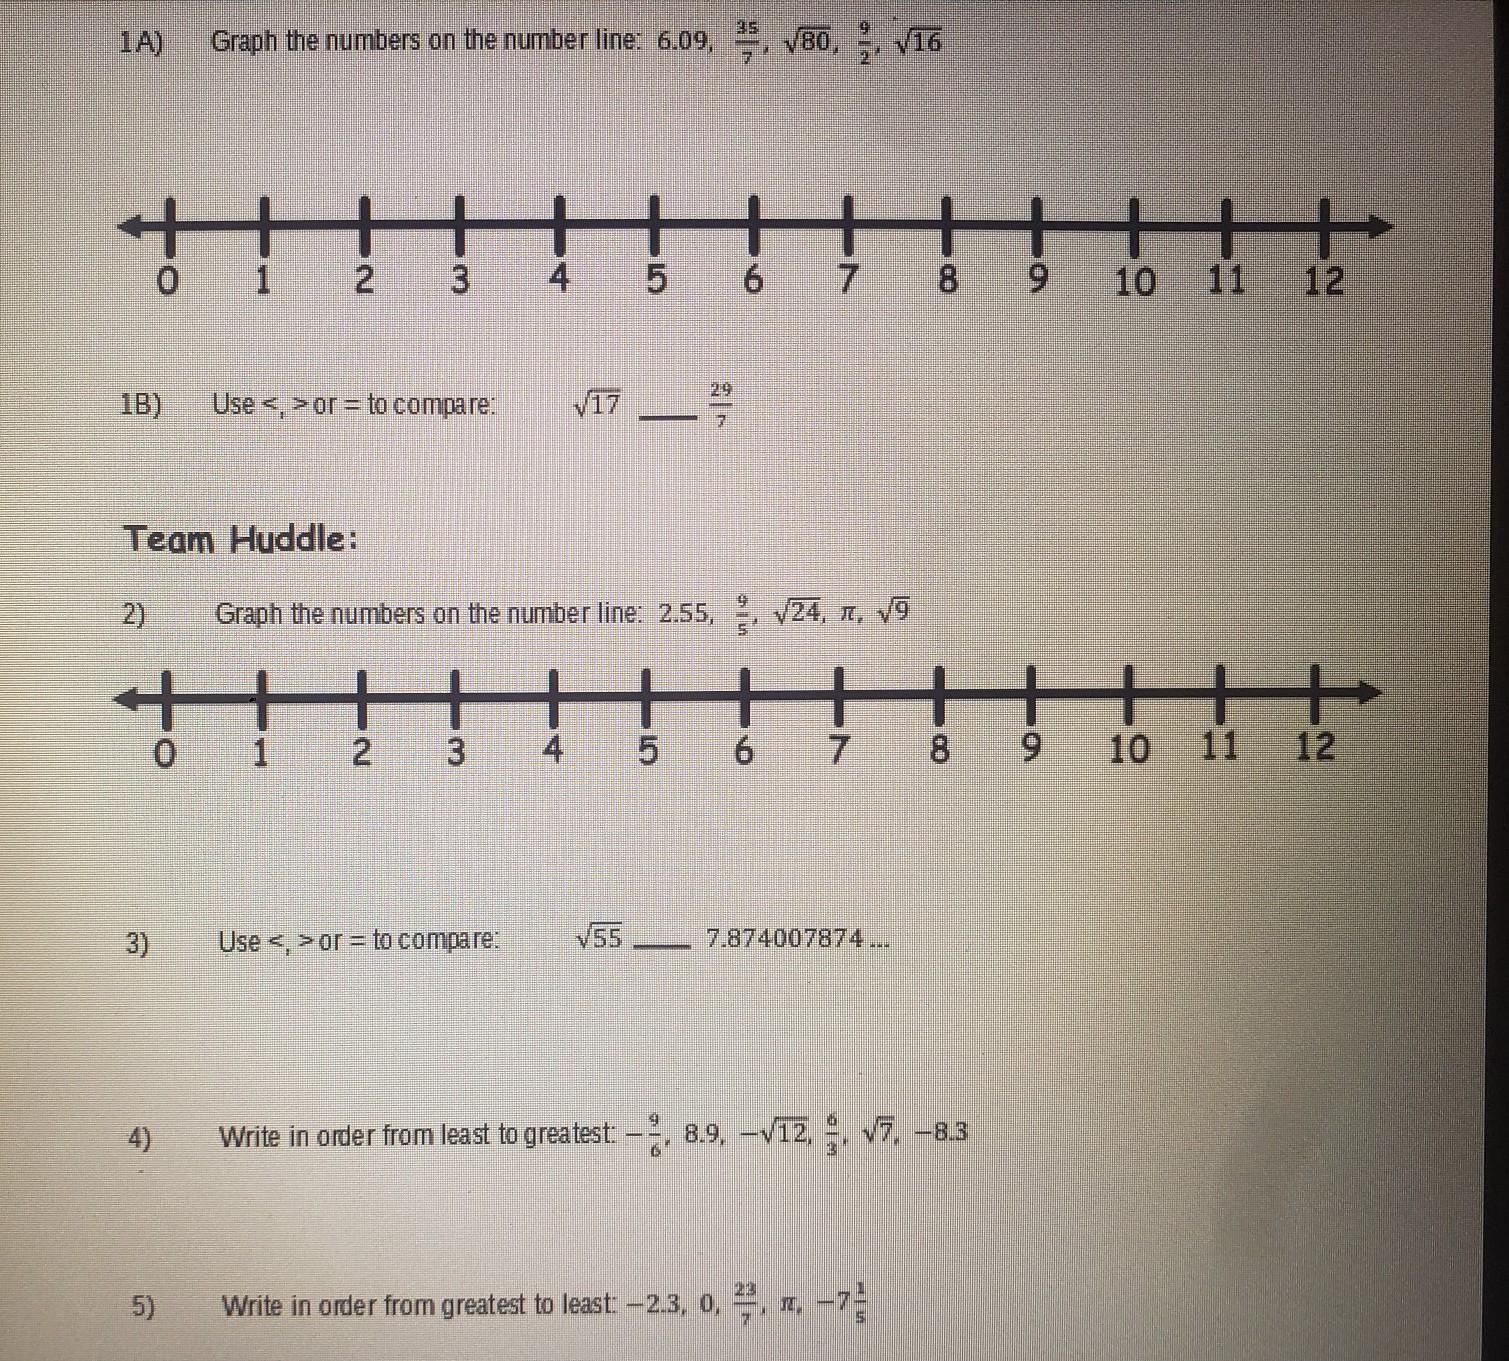 I NEED HELPP1. Graph The Numbers On The Number Line1. Use &lt;, &gt; Or = To Compare2. Graph The Numbers